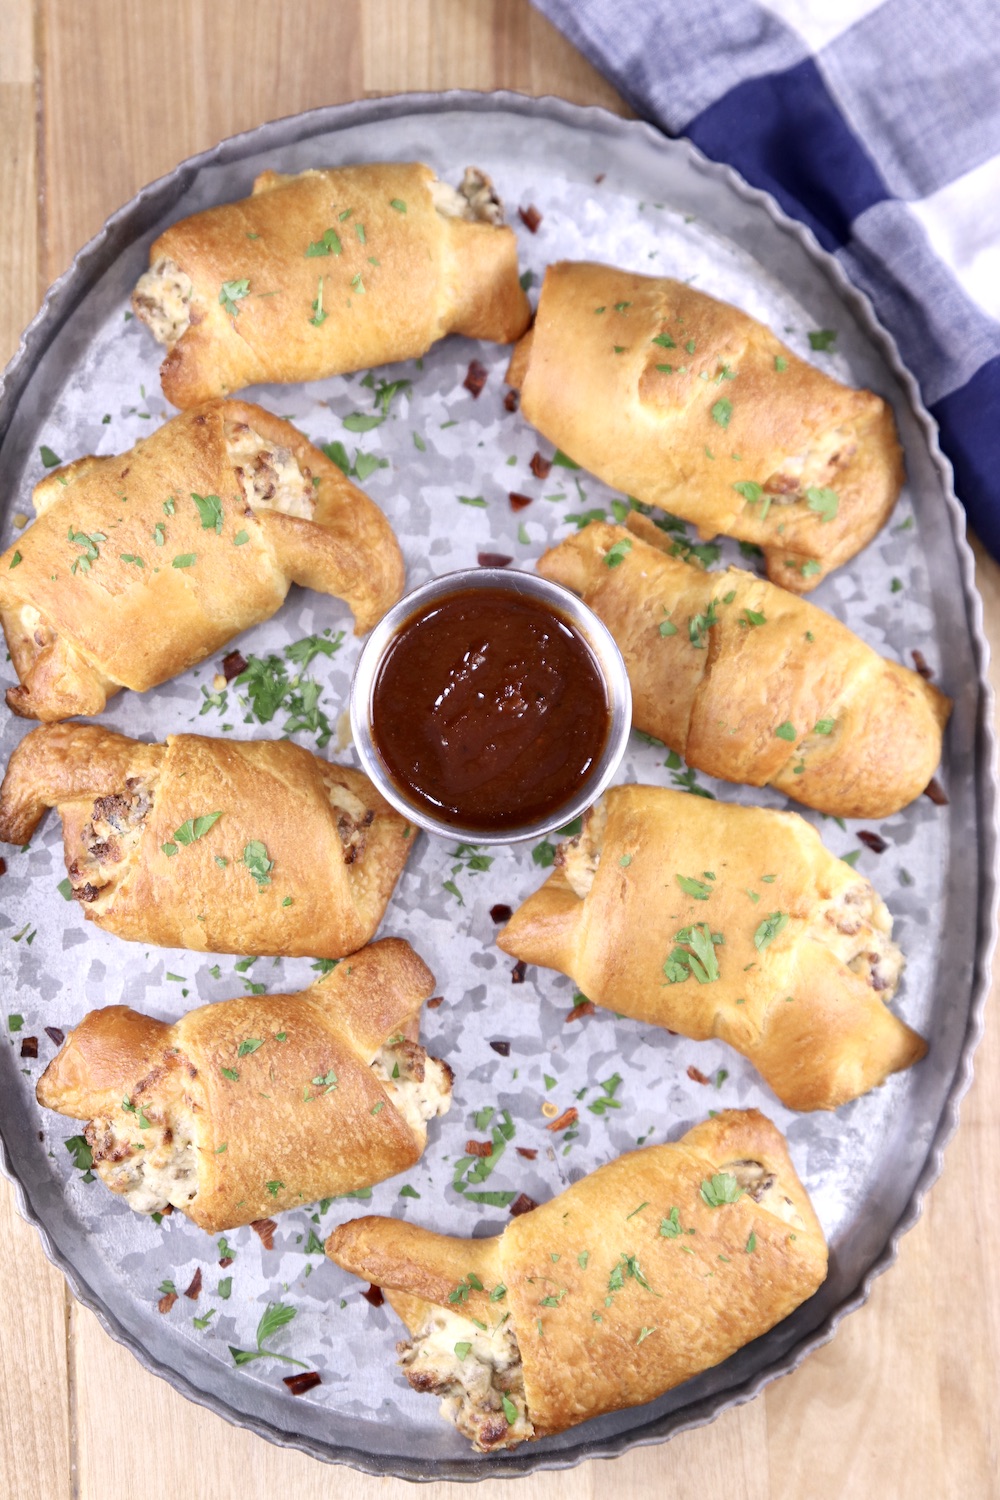 Platter of sausage cream cheese crescents with bbq sauce for dipping